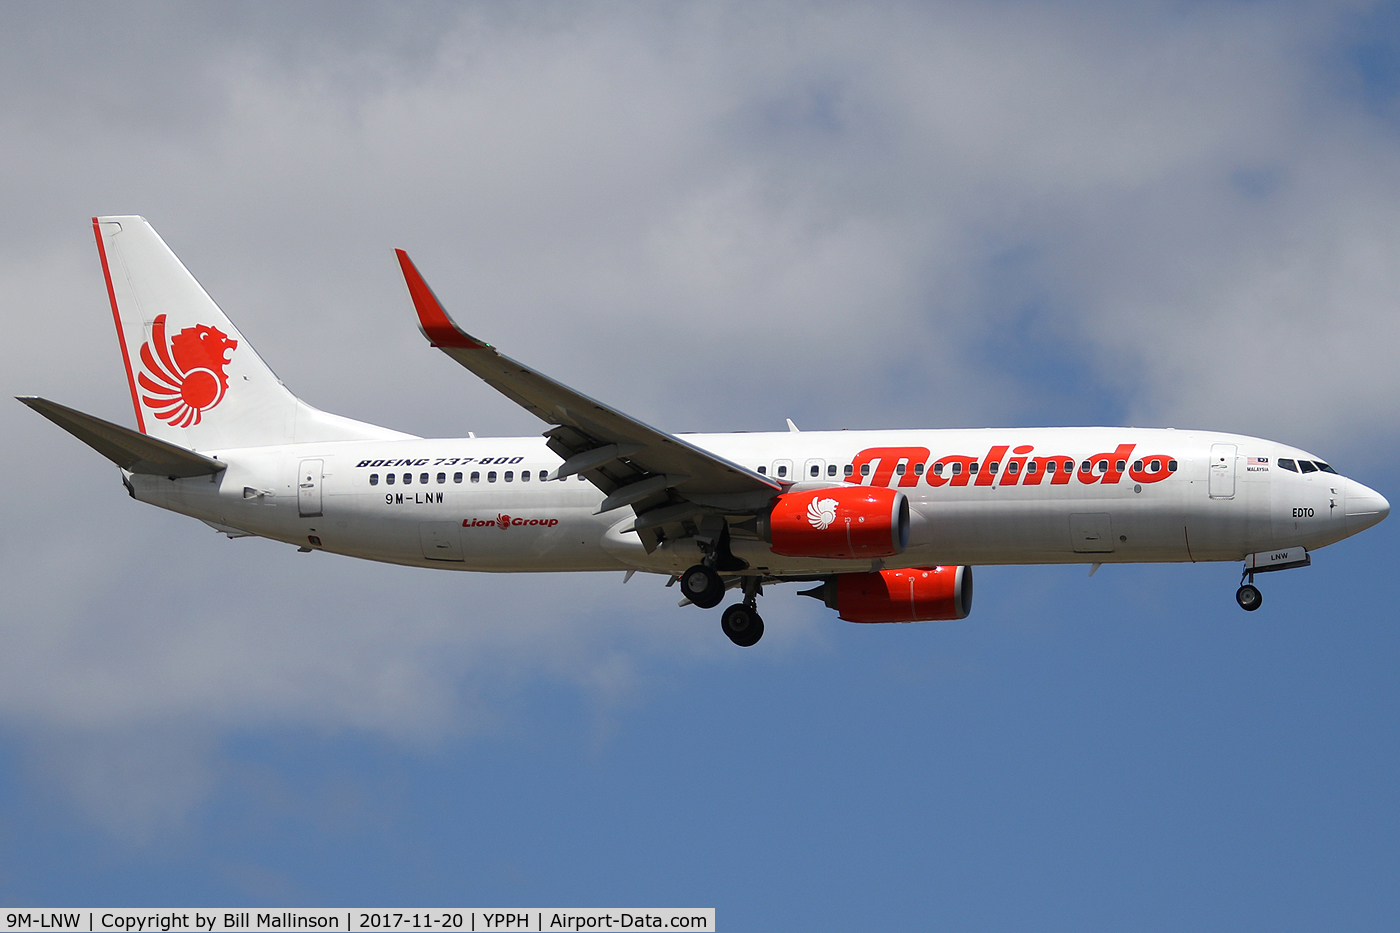 9M-LNW, 2015 Boeing 737-8GP C/N 39875/5616, FINALS FOR 21